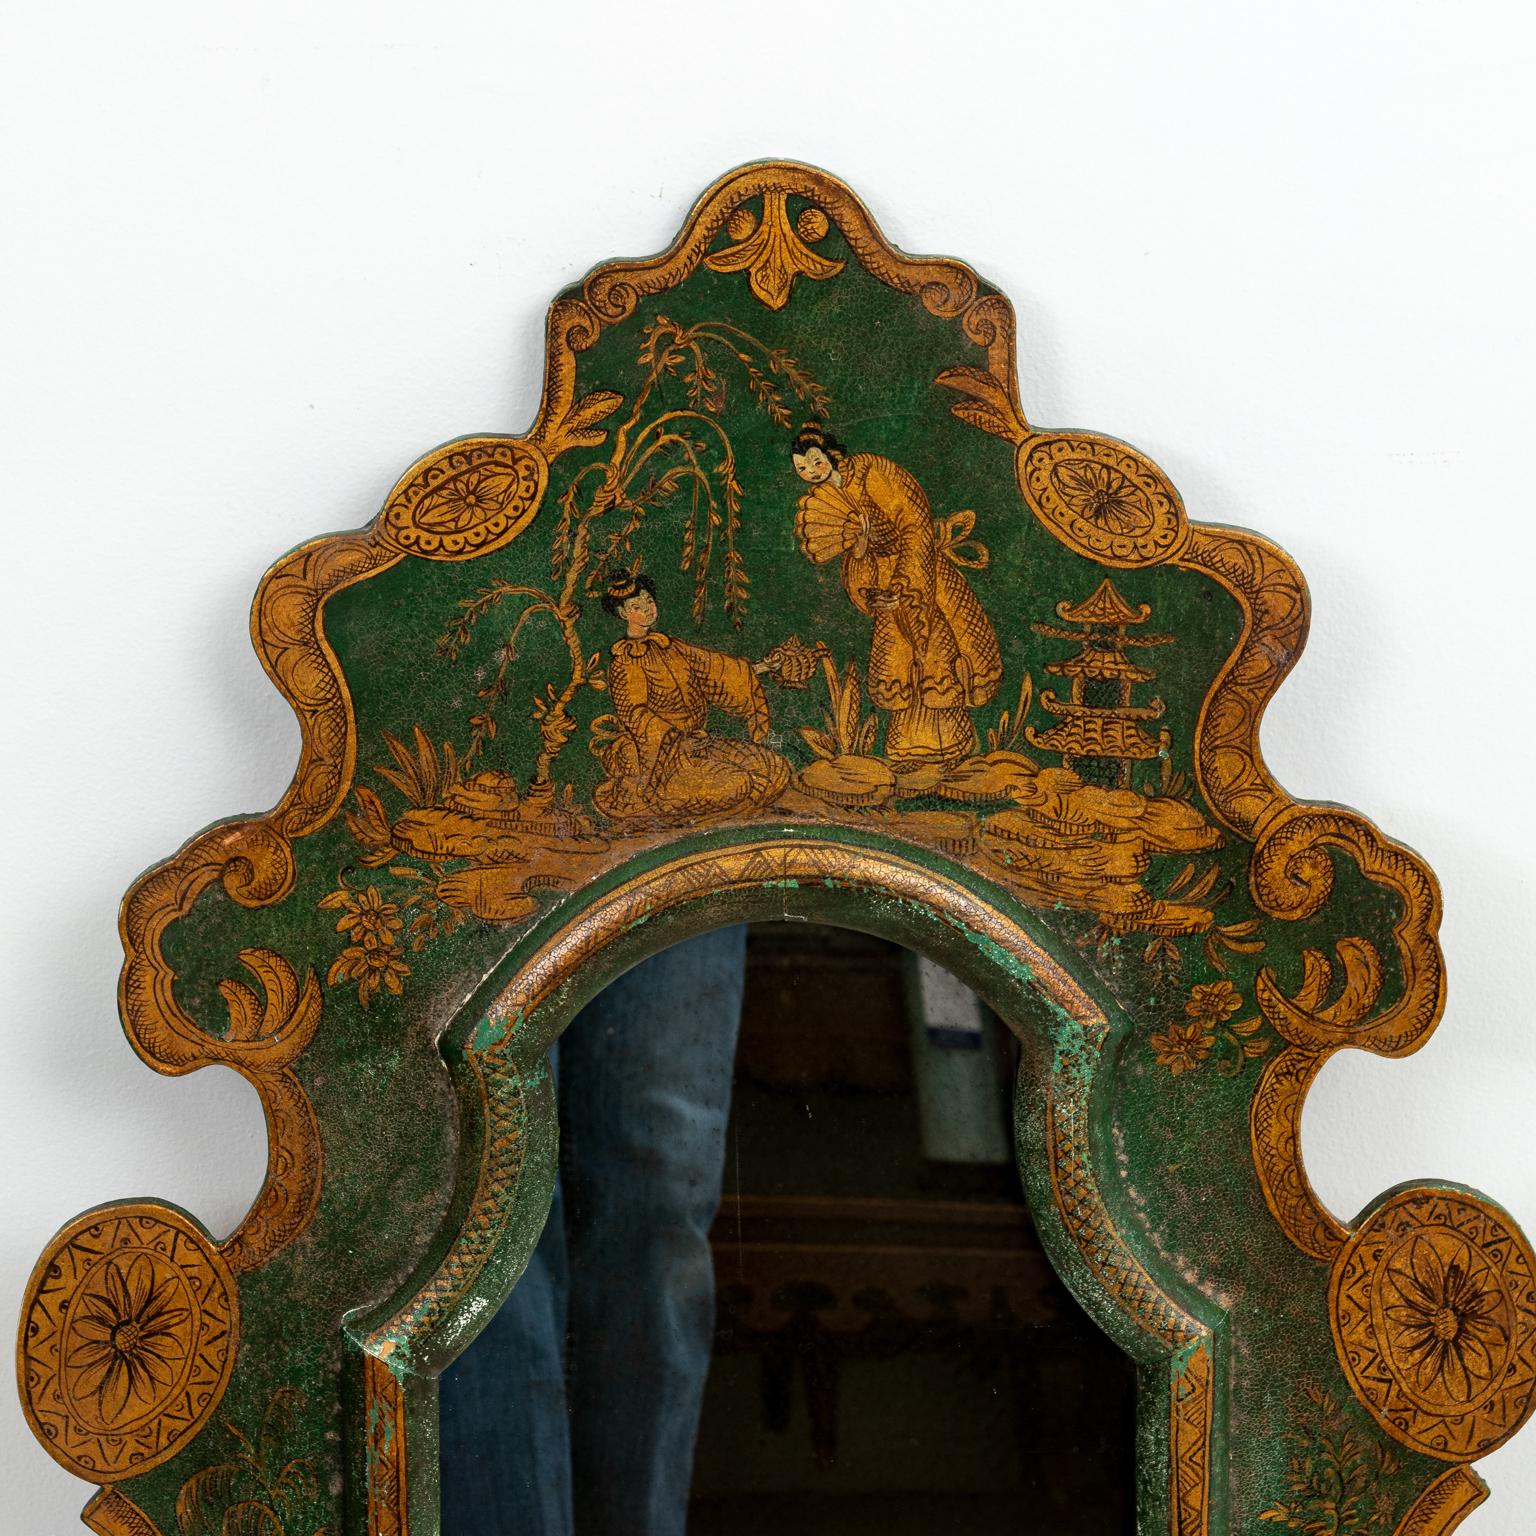 Green painted mirror with original glass that features Chinese style figures and floral motifs, circa 19th century. Please note of wear consistent with age including some green paint loss.